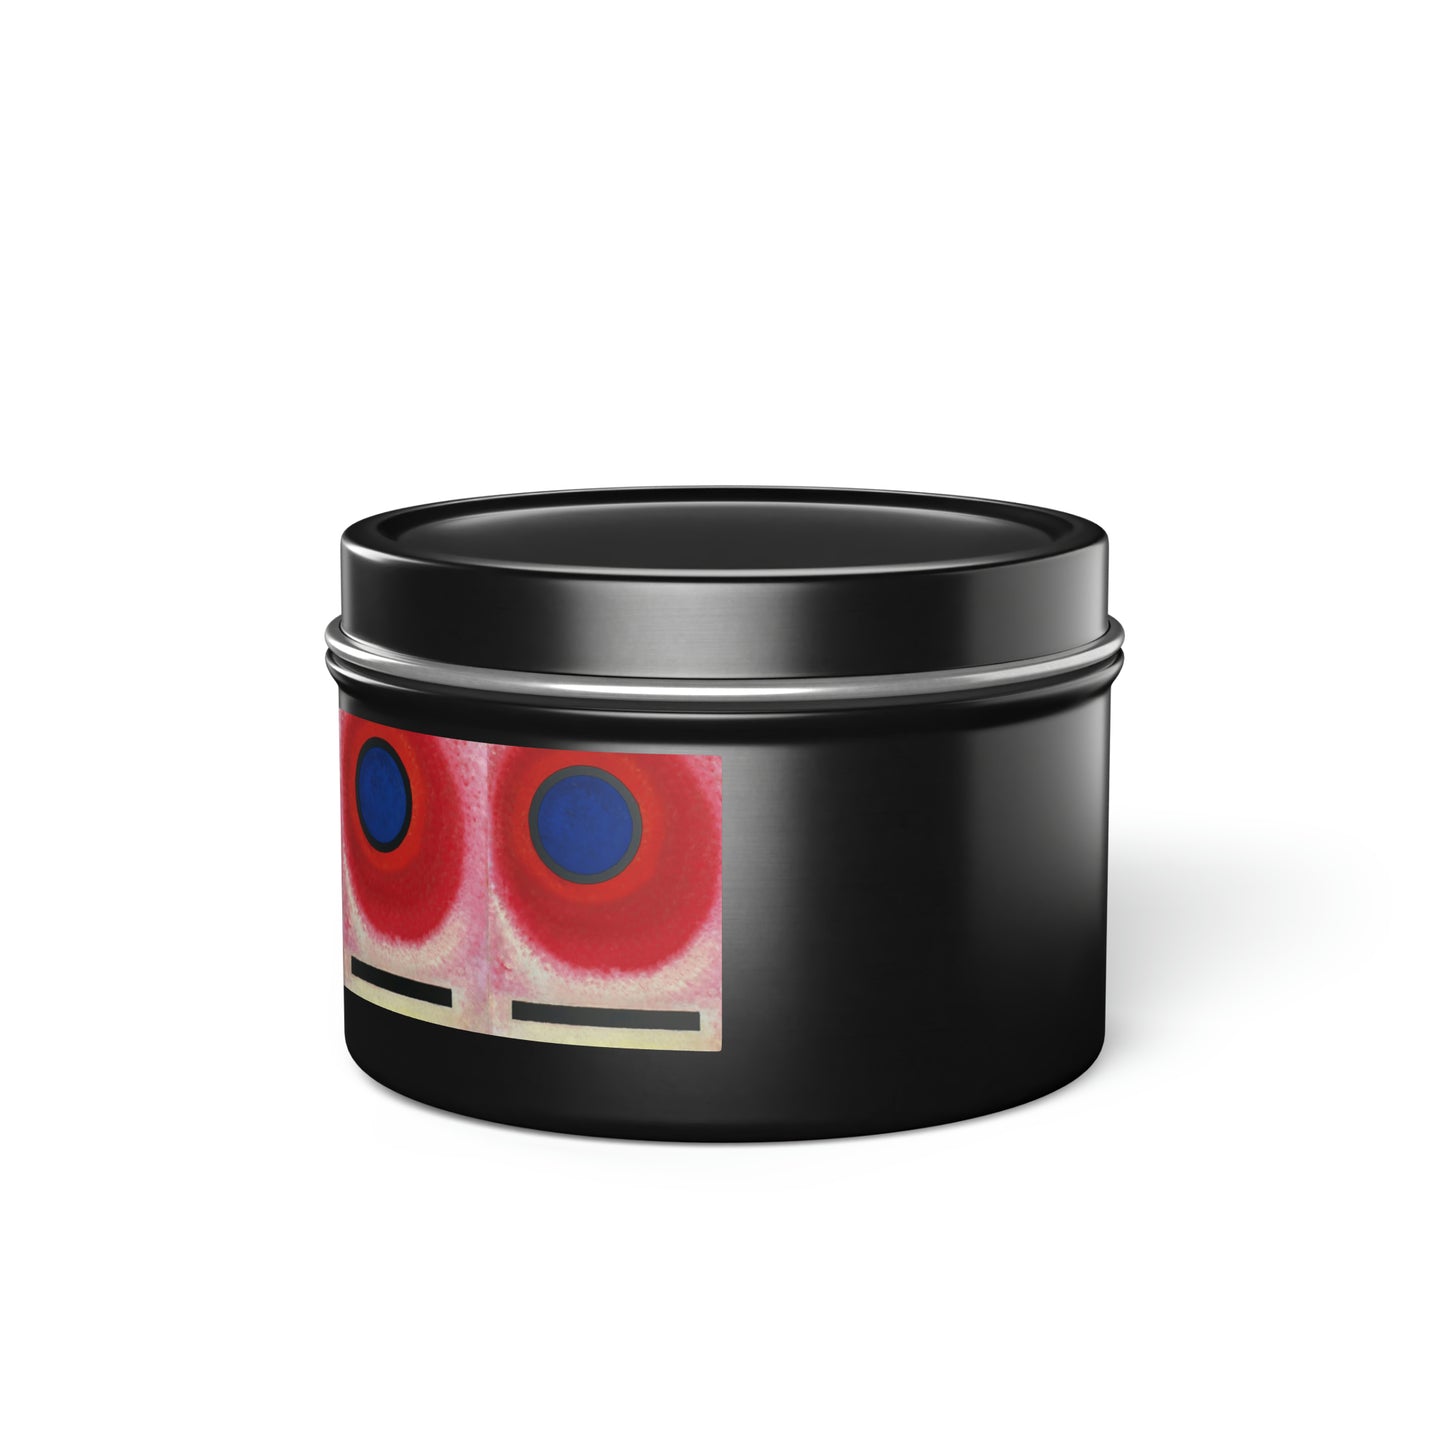 a black container with a red and blue design on it